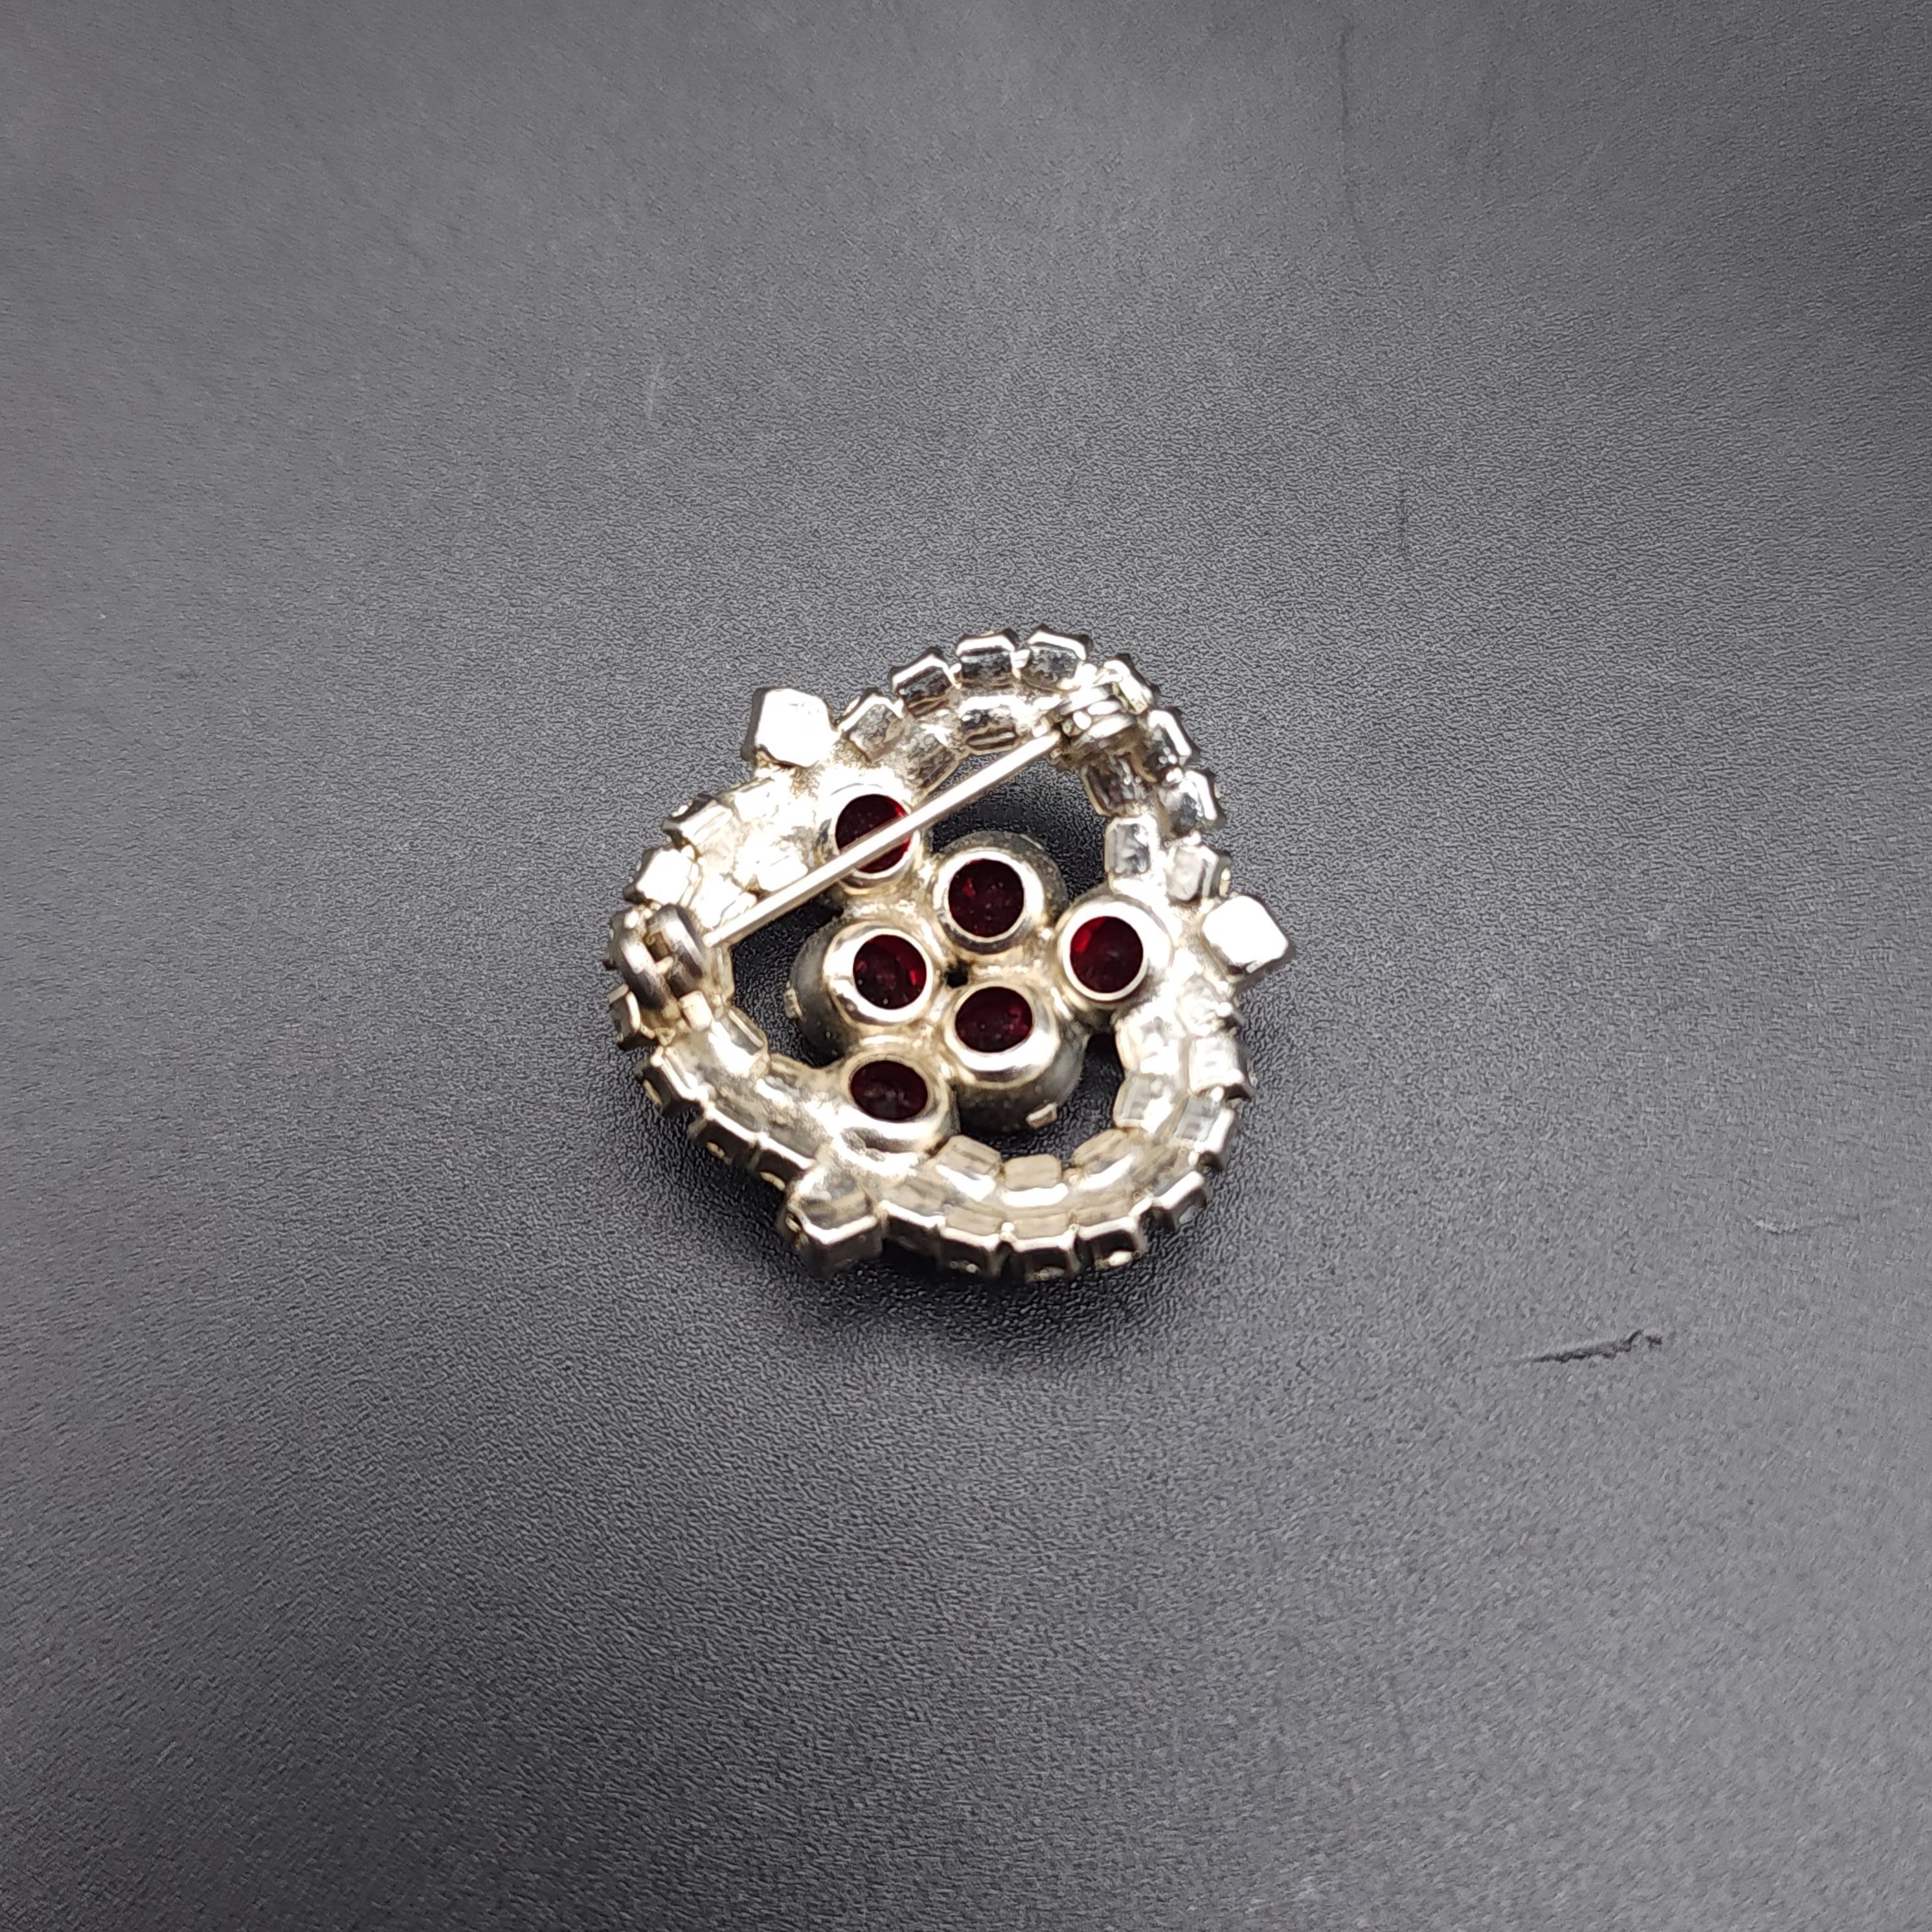 Vintage Ruby Crystal Brooch, Regal Motif, Silver-Tone Setting Mid 1900s In Excellent Condition For Sale In Milford, DE